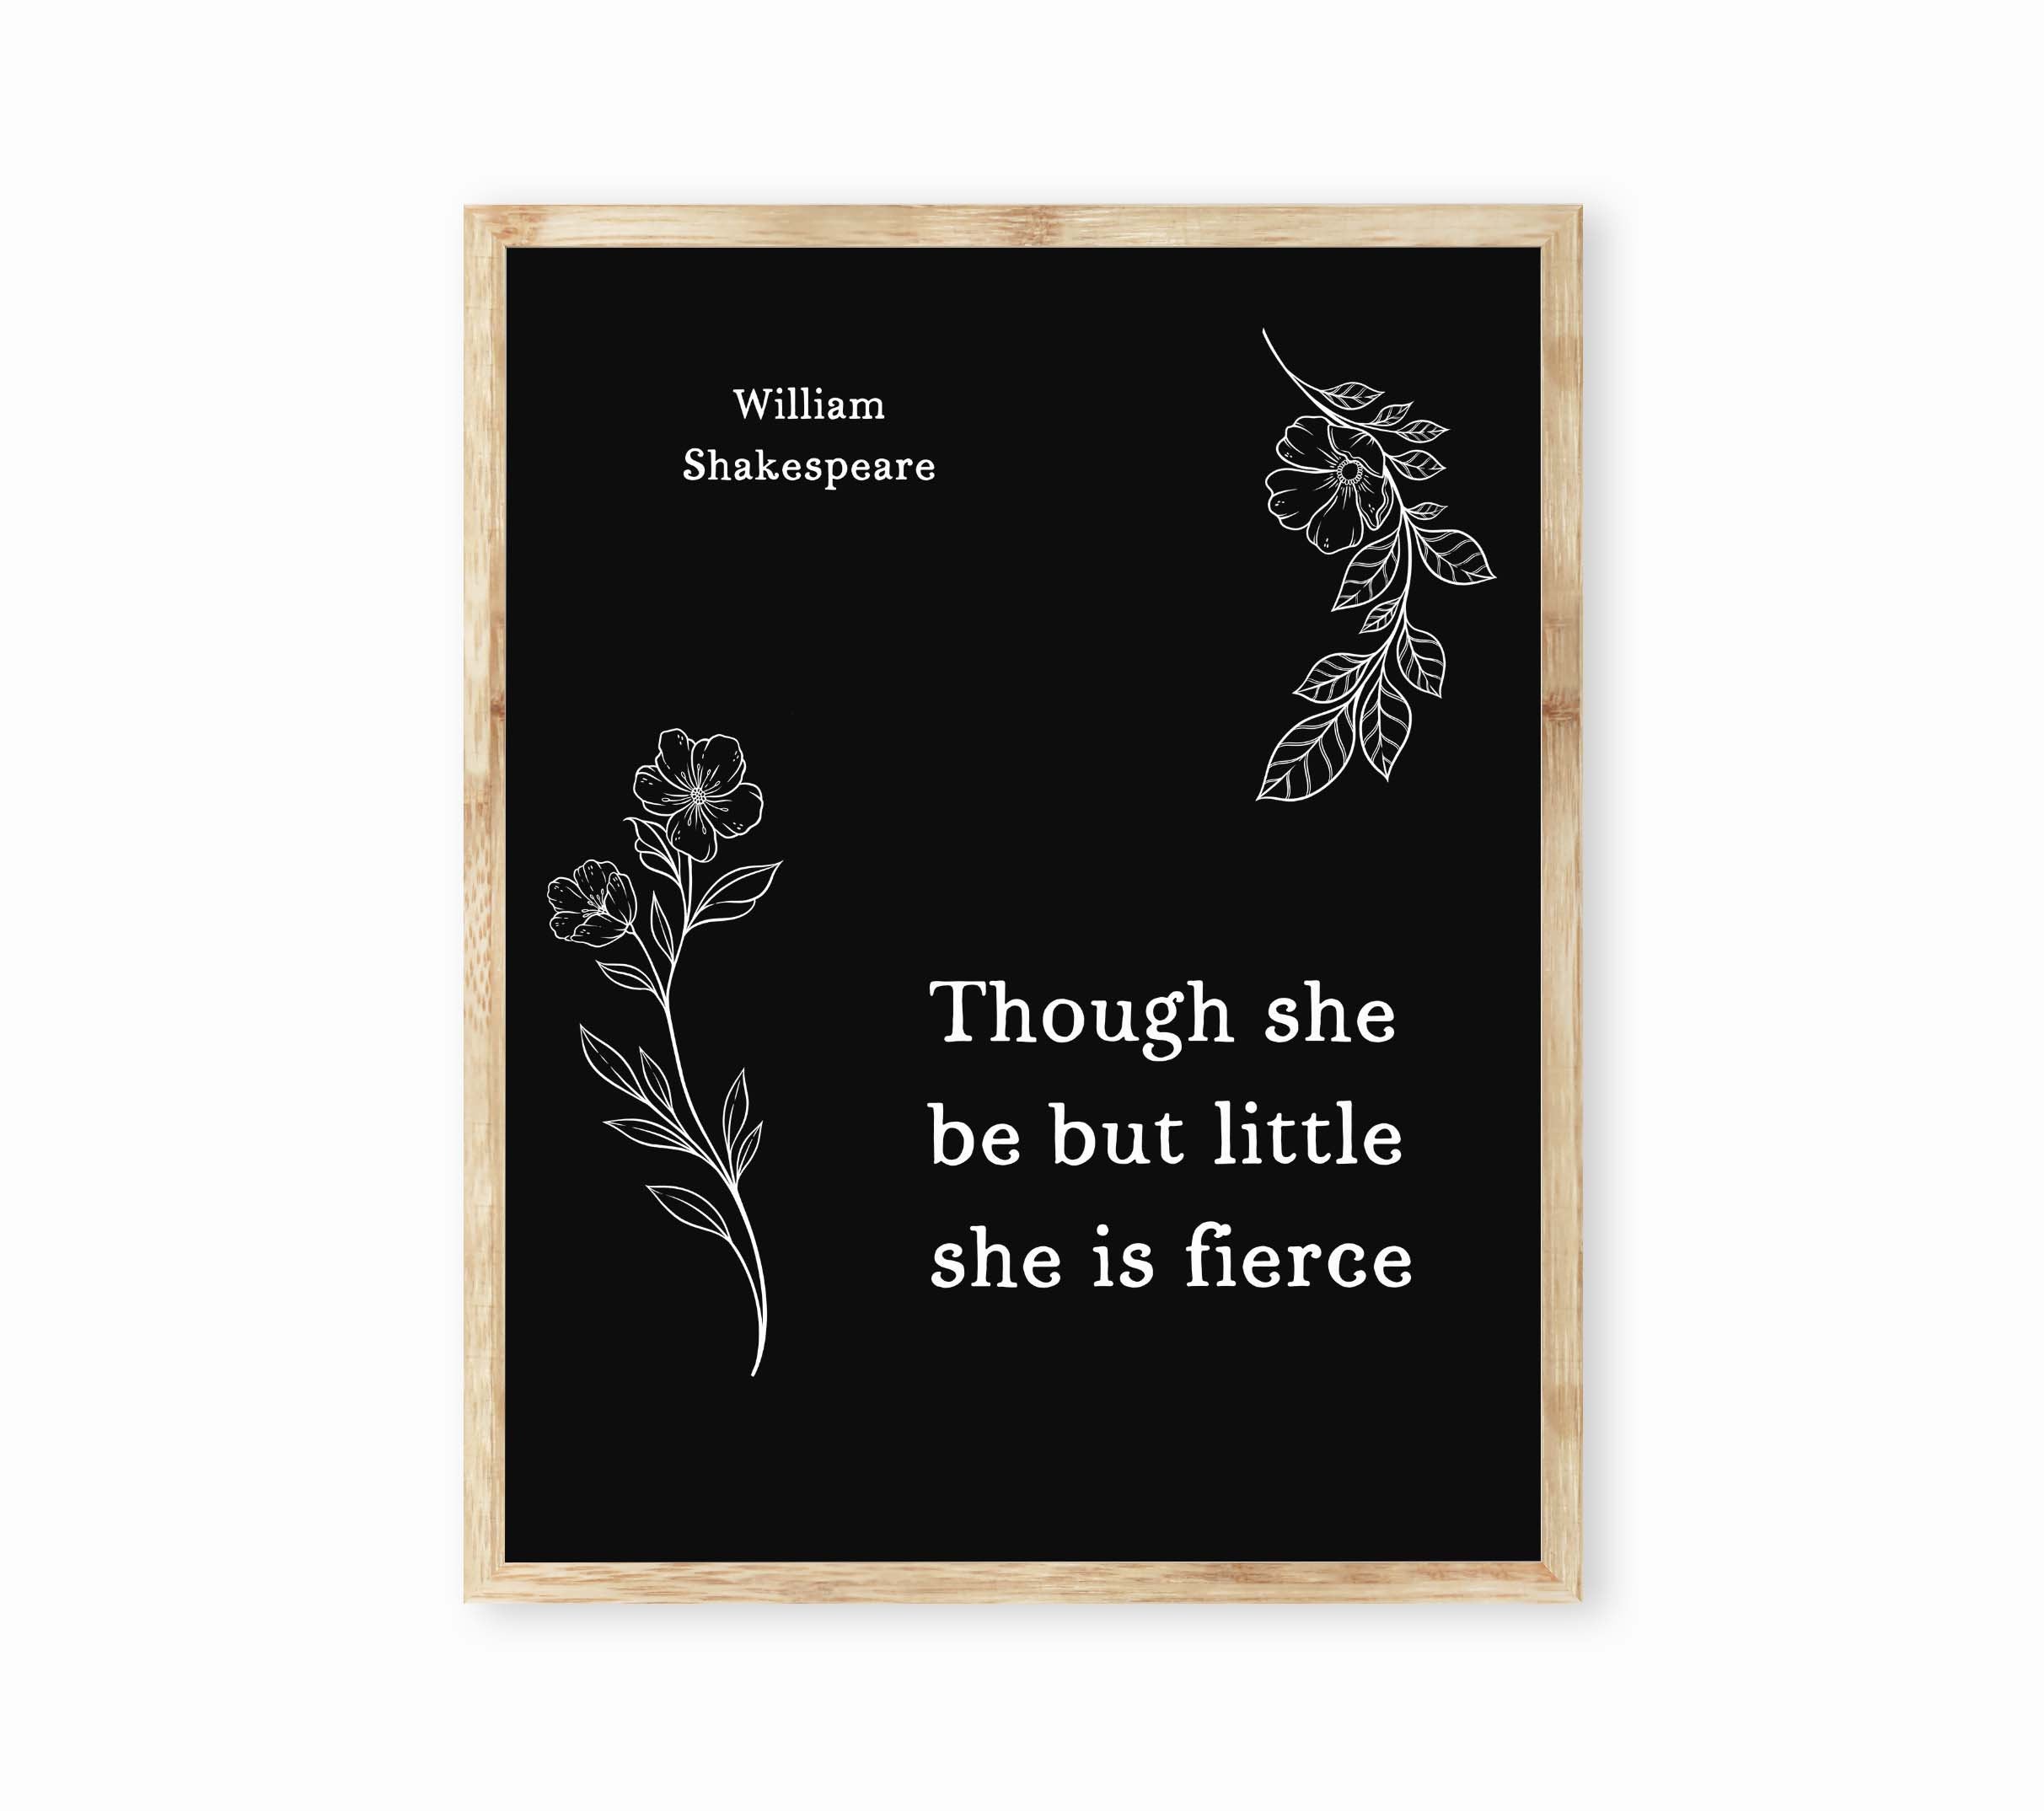 Though She Be But Little She Is Fierce Wall Art Prints, William Shakespeare Nights Dream